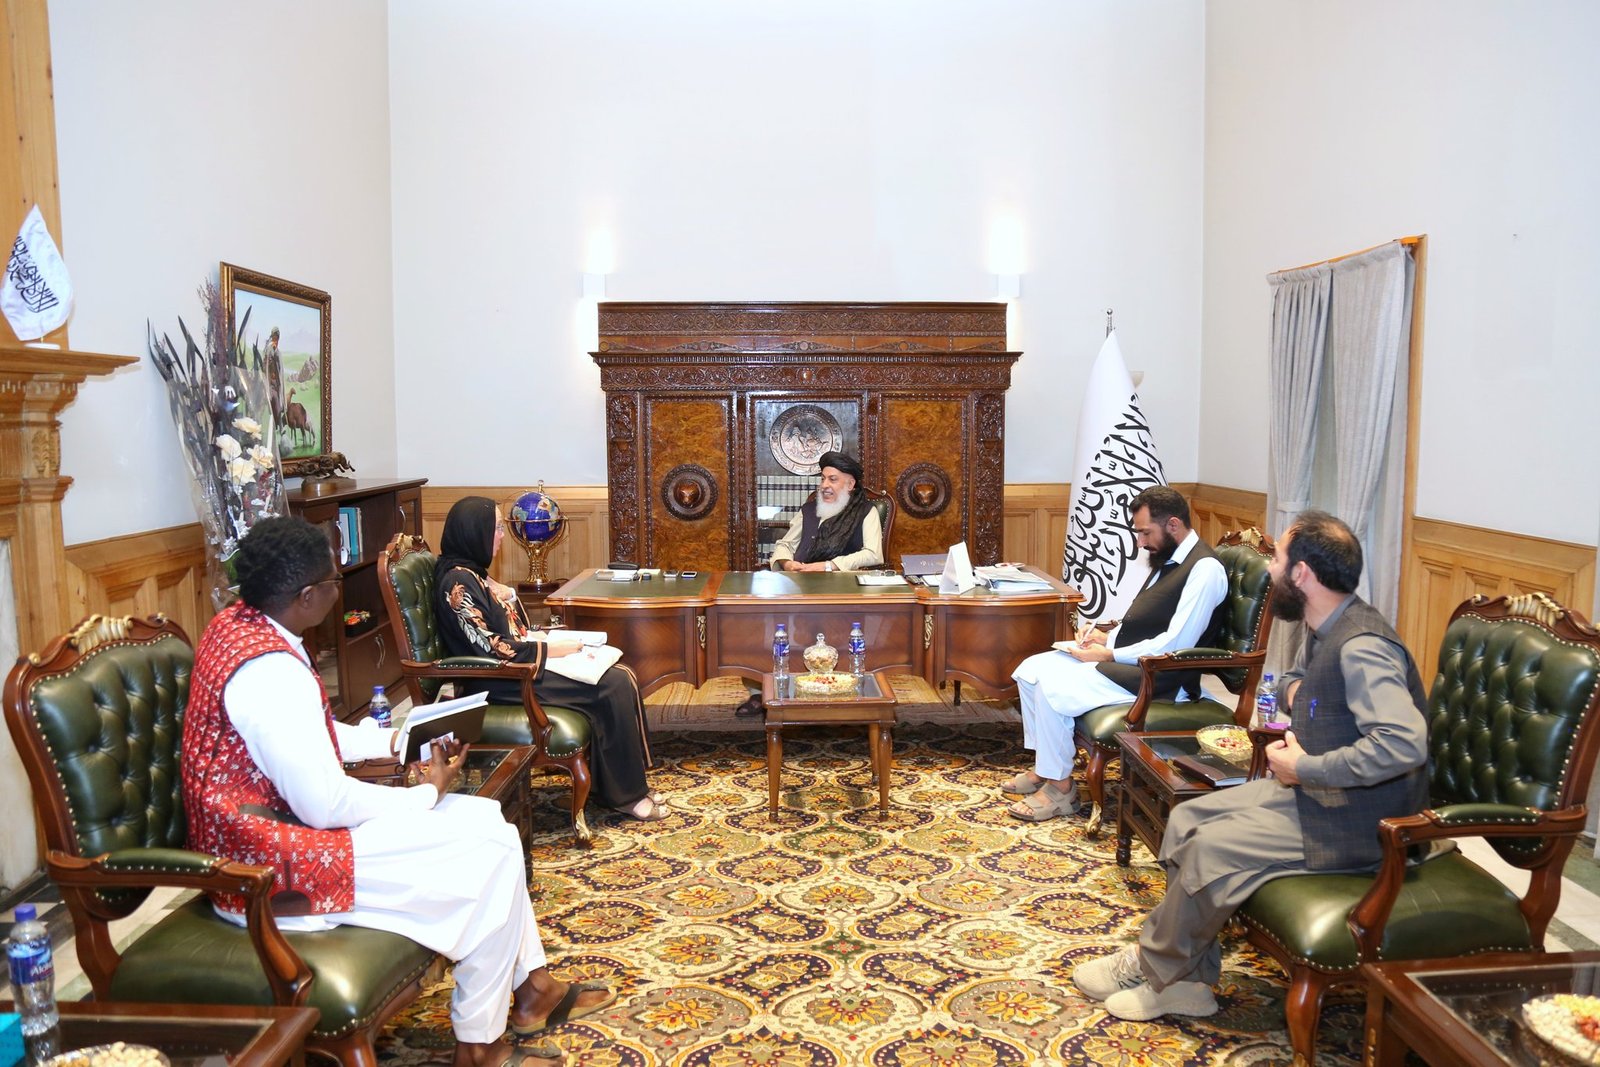 The International Program Director of Save the Children, Ms. Nora Ingdal, & the accompanying delegation called on the Deputy Foreign Minister, Alhaj Sher Mohammad Abbas Stanekzai, in Storai Palace today.